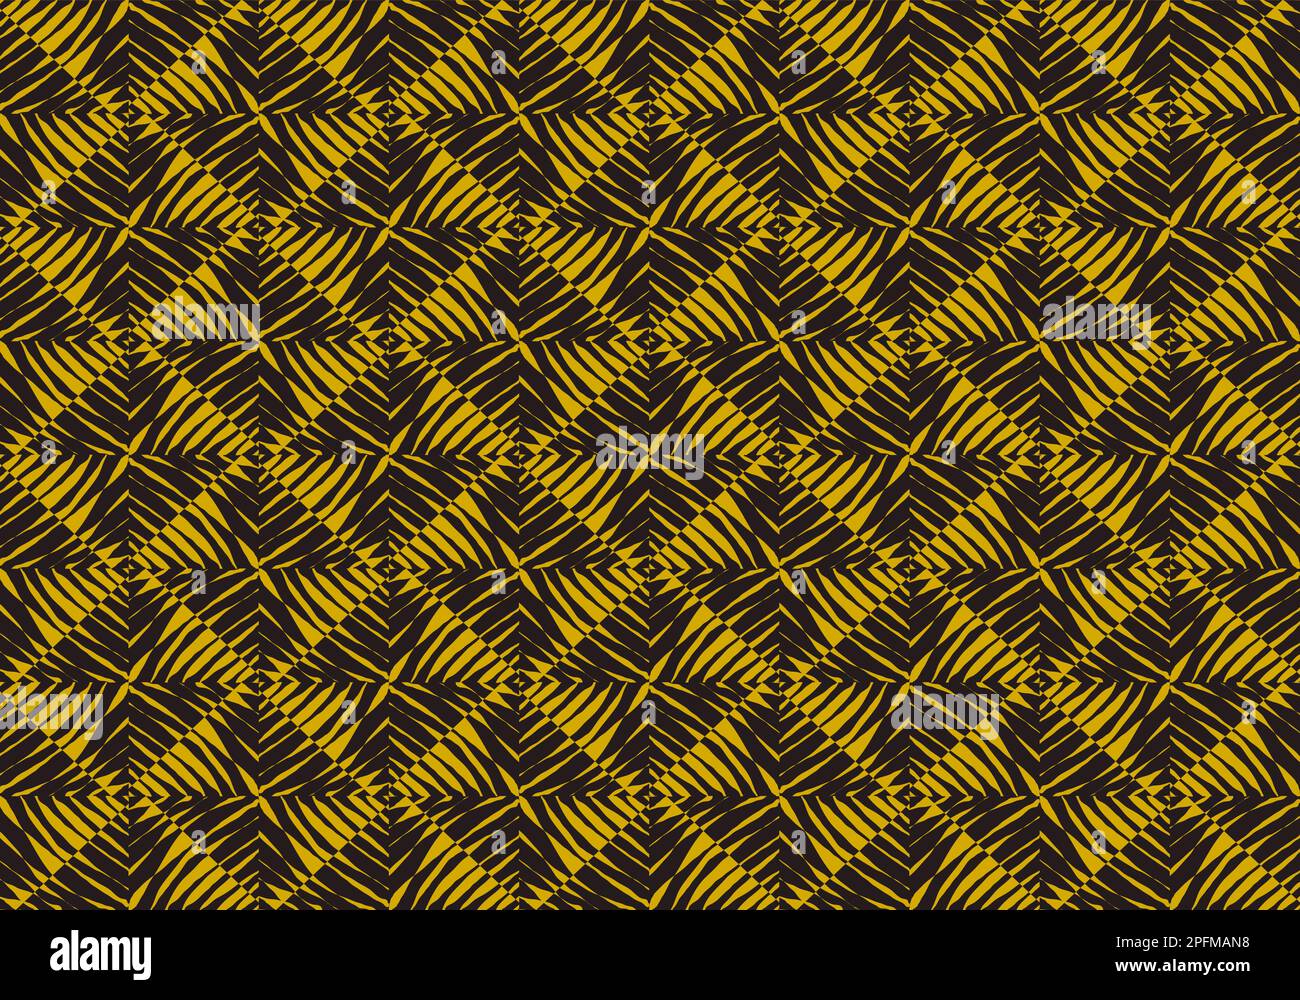 Gold and Black Leaf Pattern Mosaic Tiles Design Art for Backgrounds. Seamless Pattern. Mosaic. Geometry. Vector Illustration Graphic Design. Stock Vector